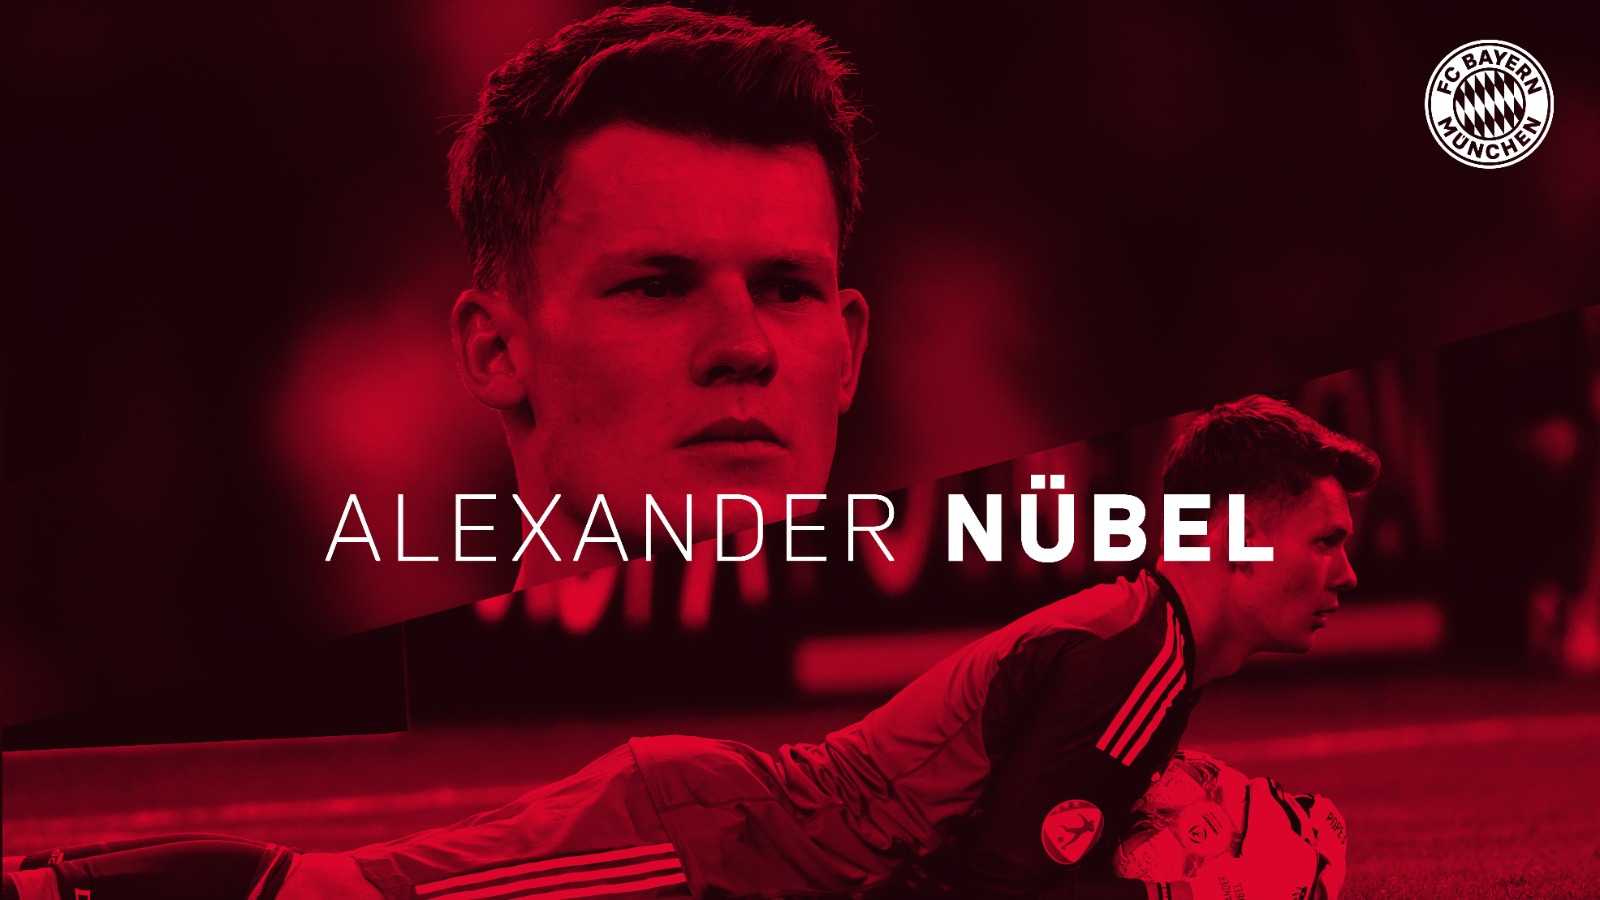 Bayern confirm the capture of the new Neuer